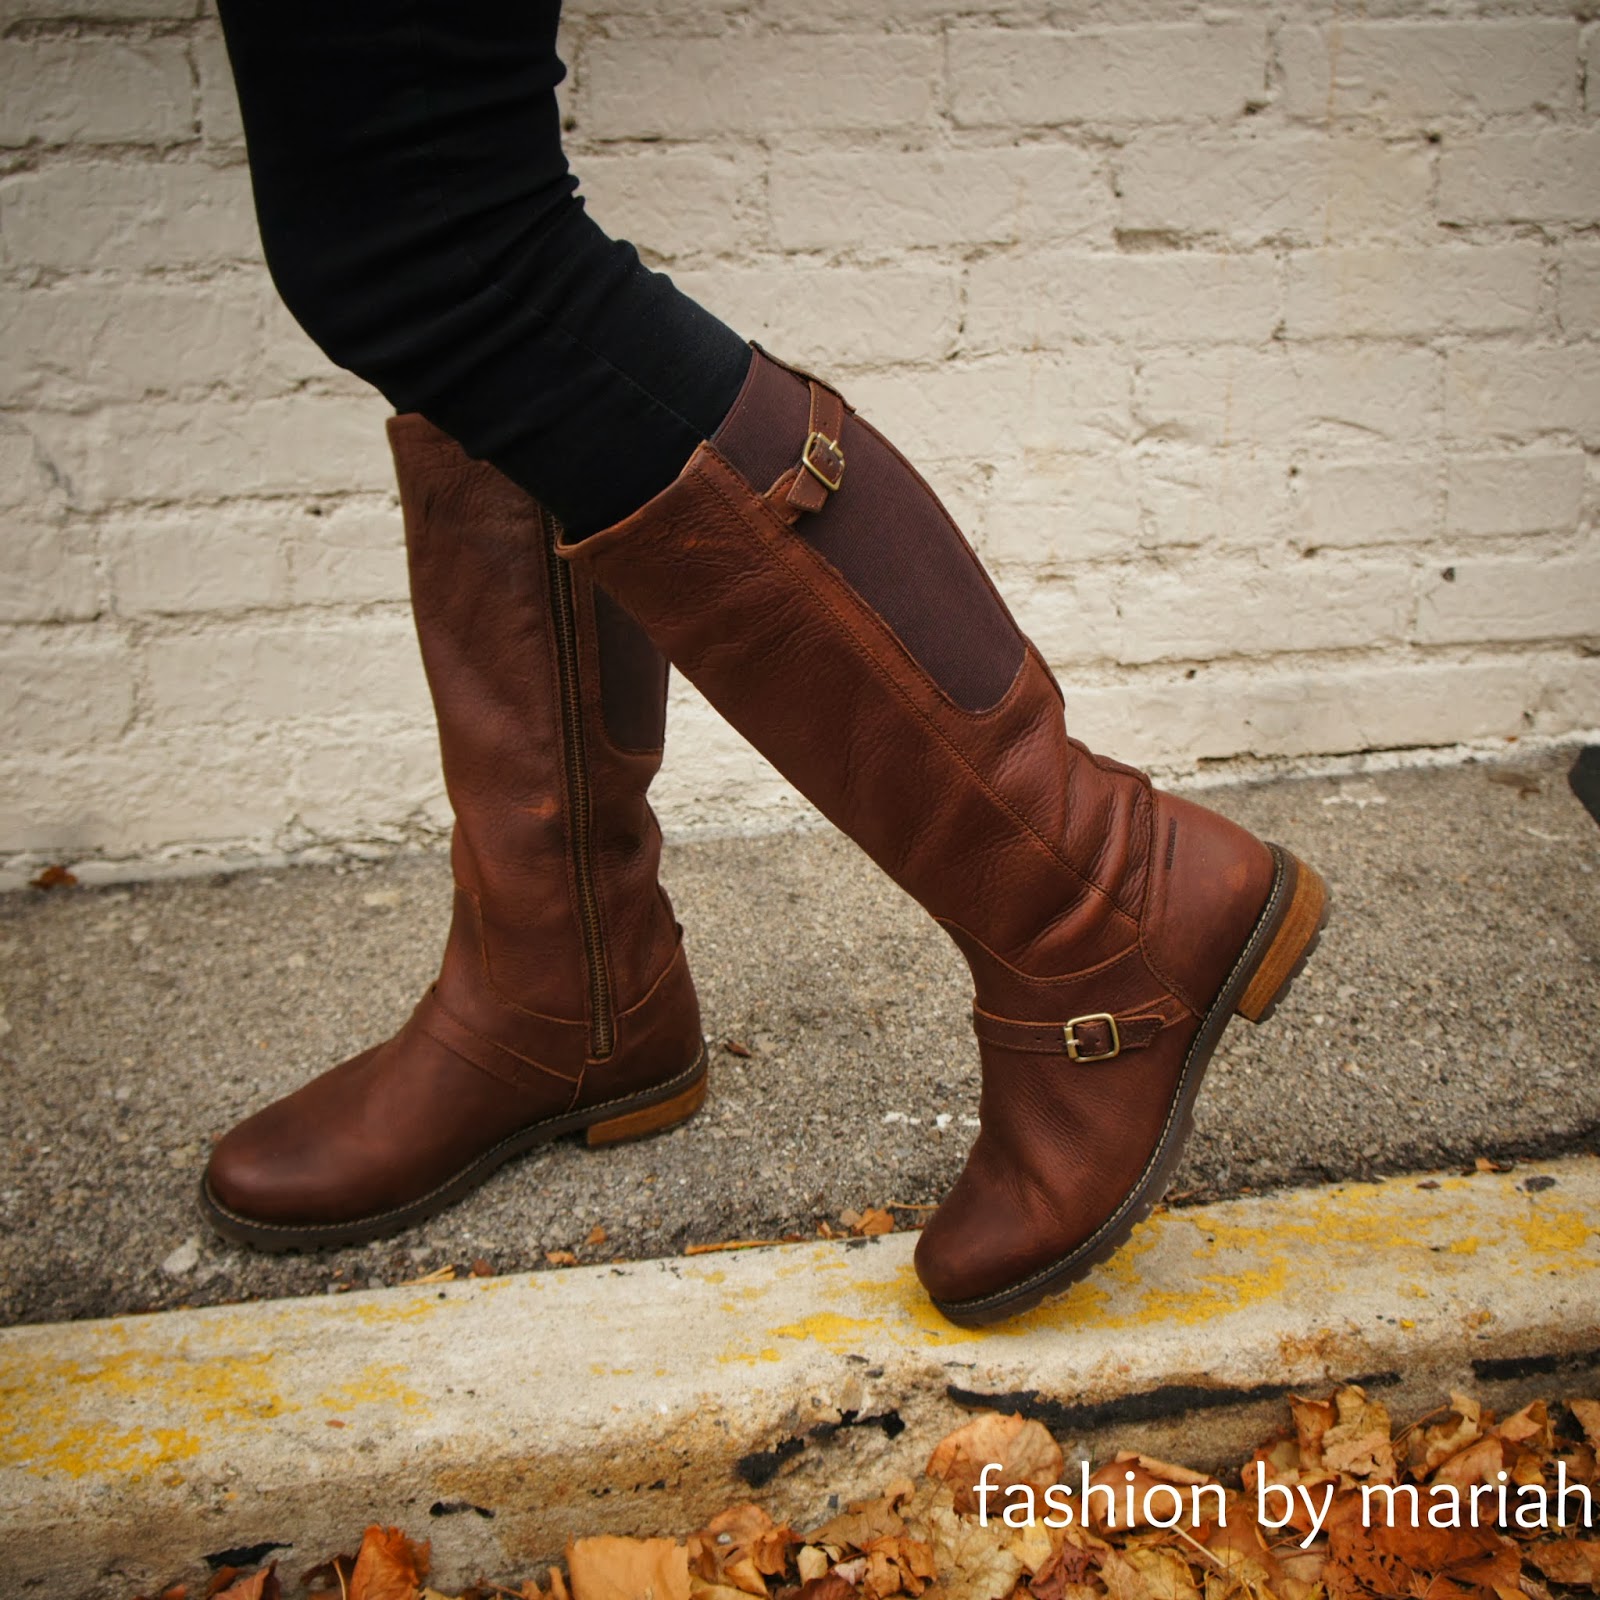 Fashion & Lifestyle: Favorite New Boots featuring Ariat